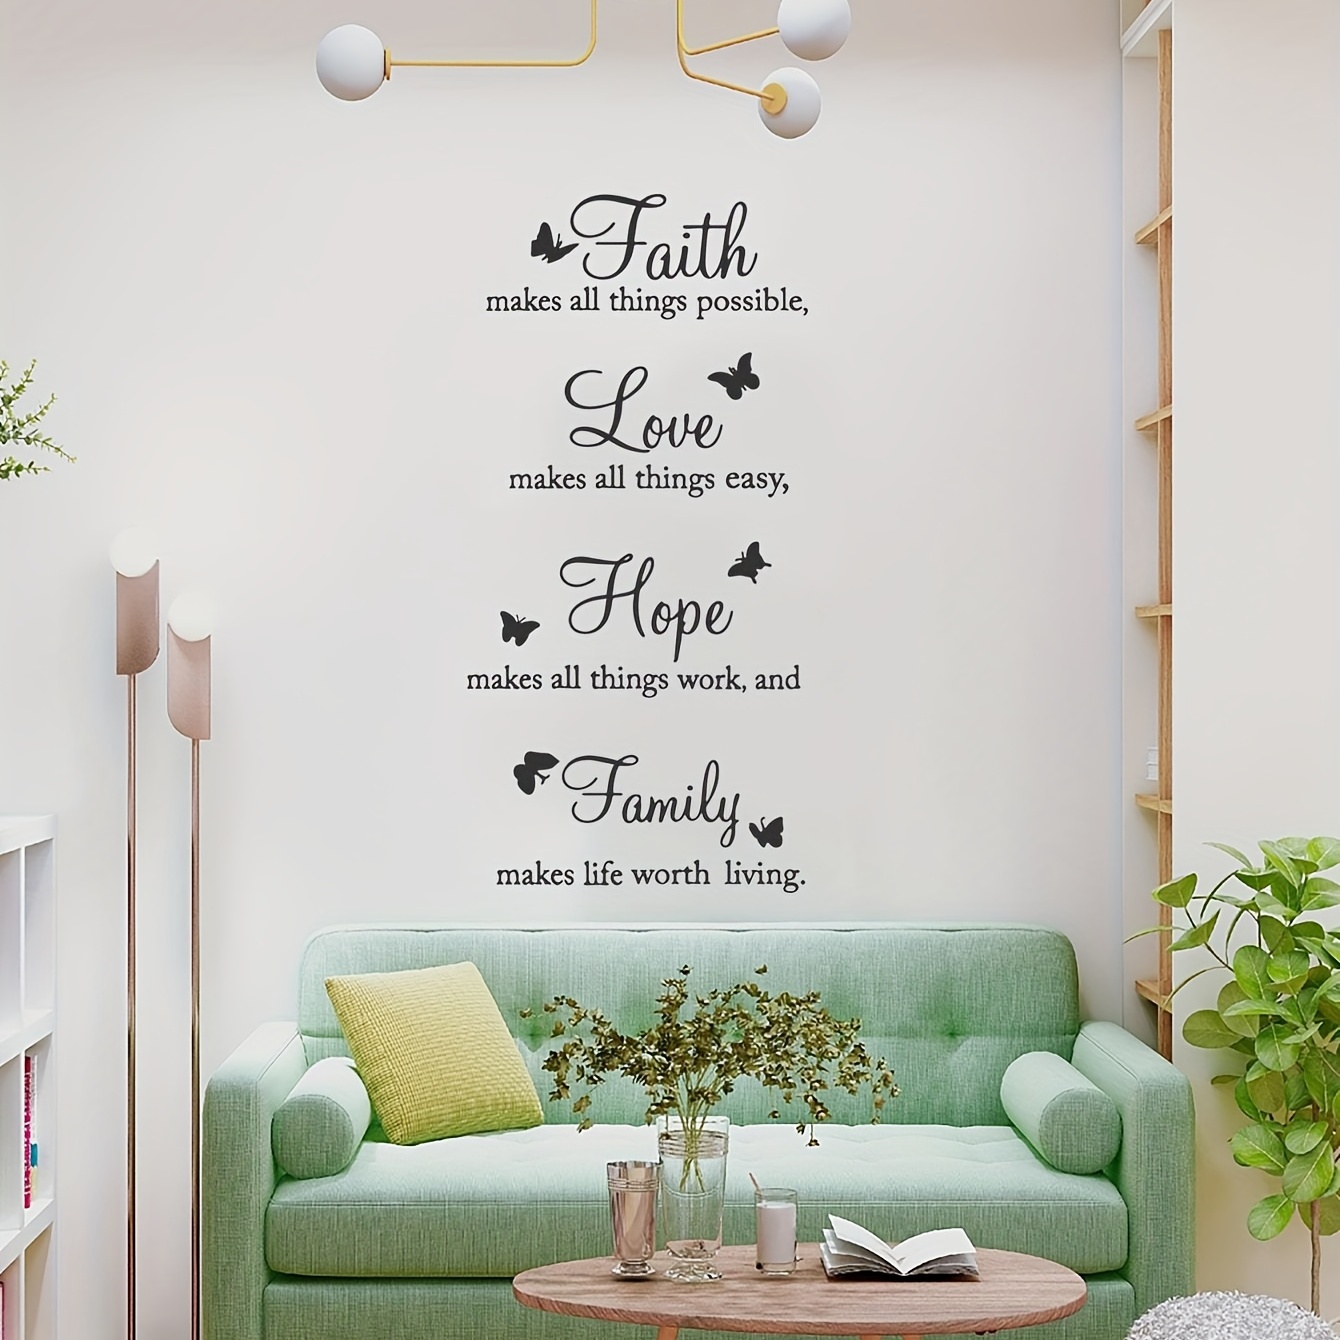 Wall Sticker VINYL WALL ART DECAL Family Wall Quote Bedroom Wall